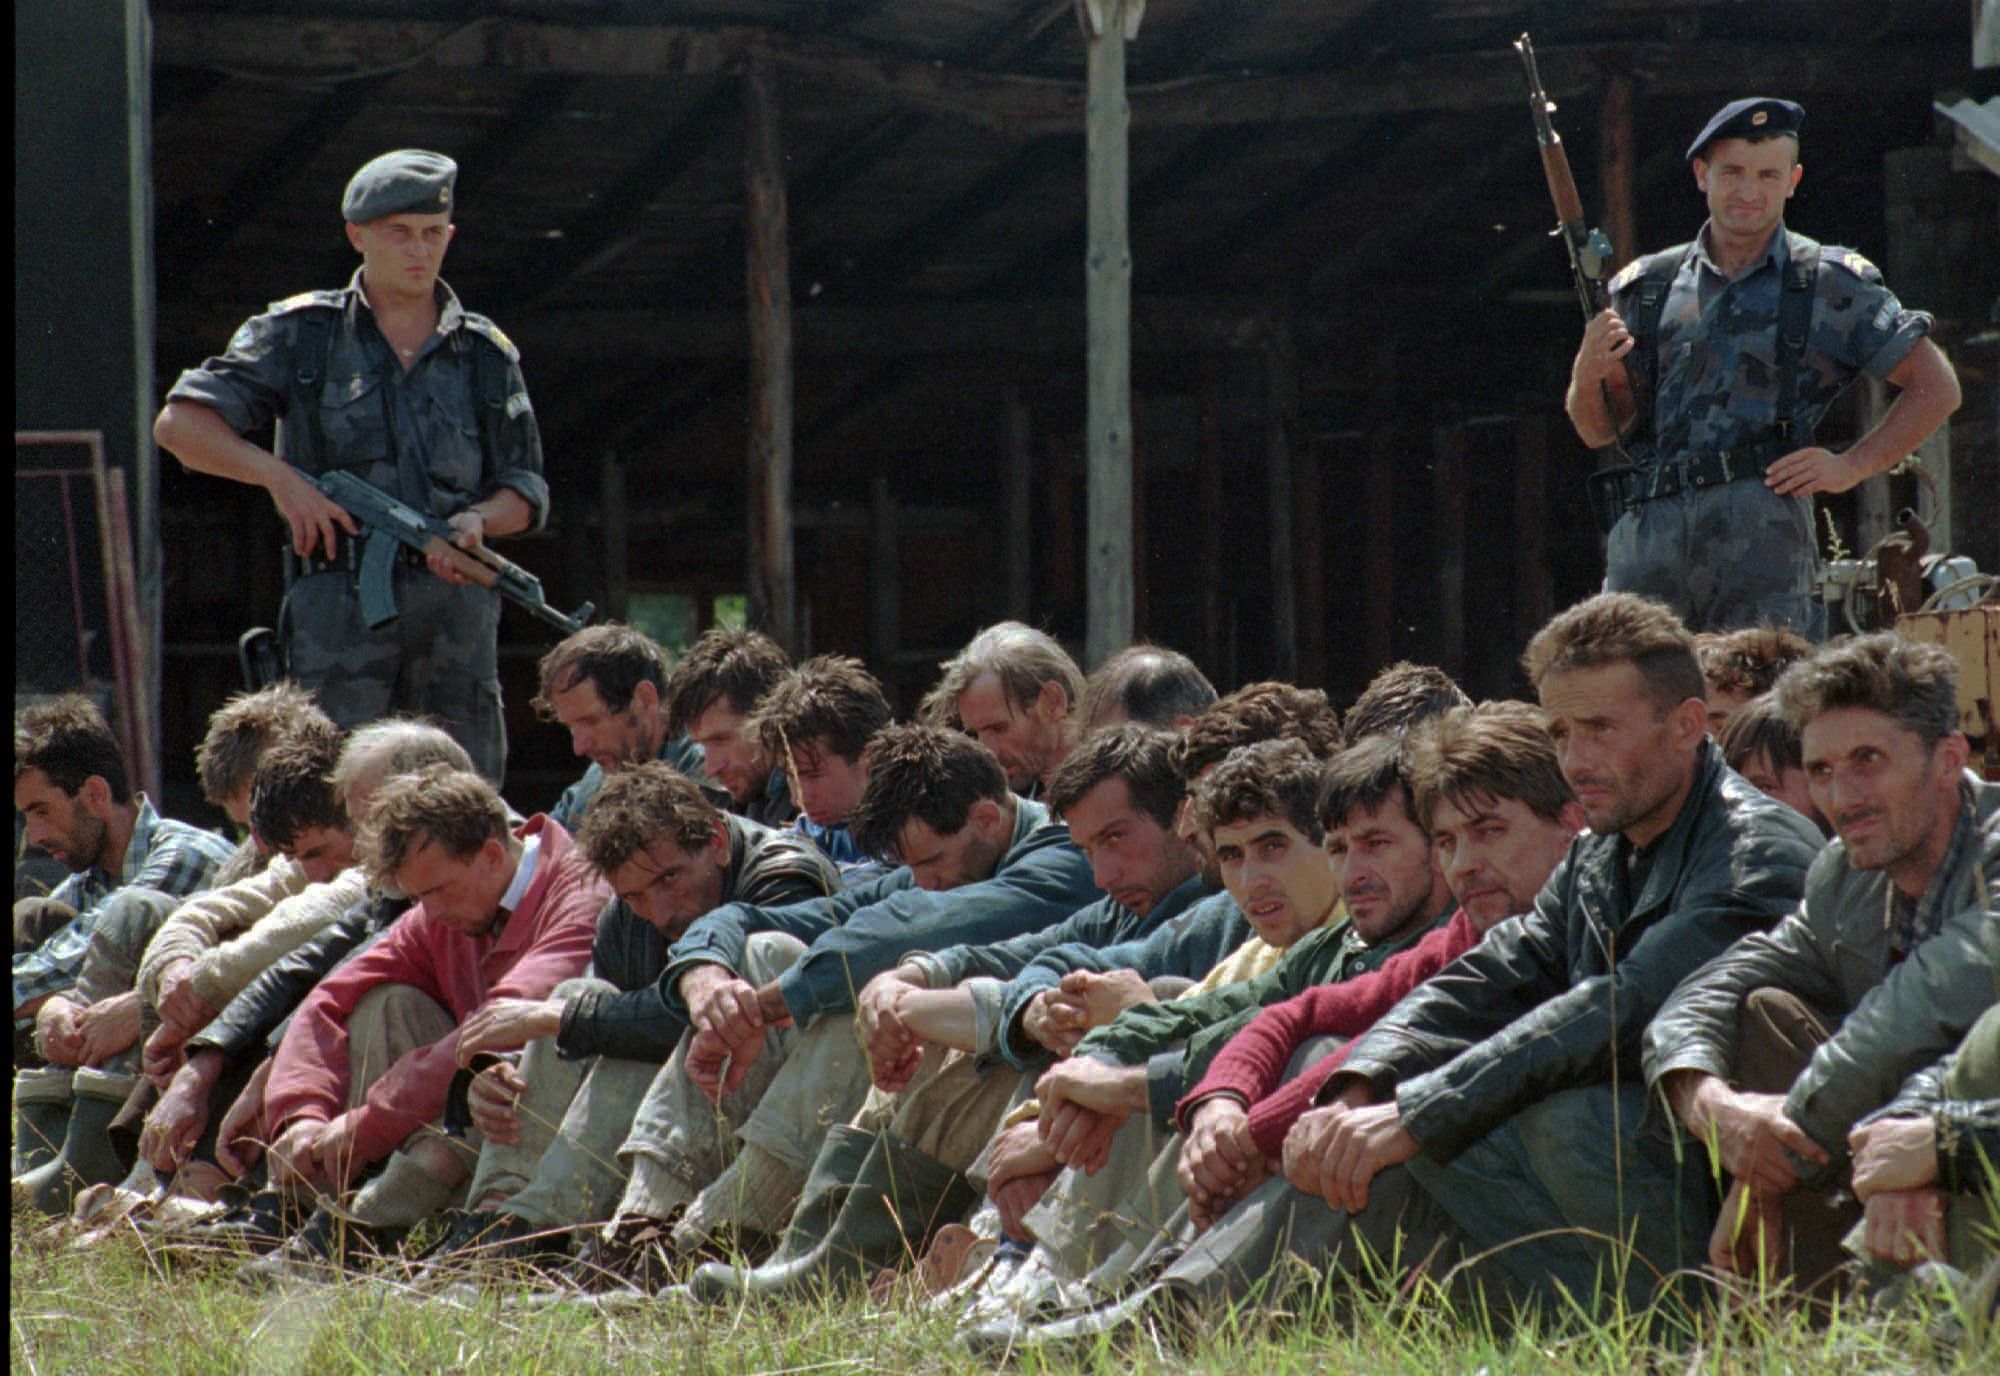 Two Serbian policemen guard a group of Bosnian Muslim men from the Srebrenica enclave that have crossed into Yugoslavia from Bosnia in the Serb town of Uzice,some 250km (155 miles) south of Belgrade Saturday Aug. 5.1995. Several hundred Bosnian Muslim men crossed the Drina river which divides Yugoslavia and Bosnia.(AP PHOTO)